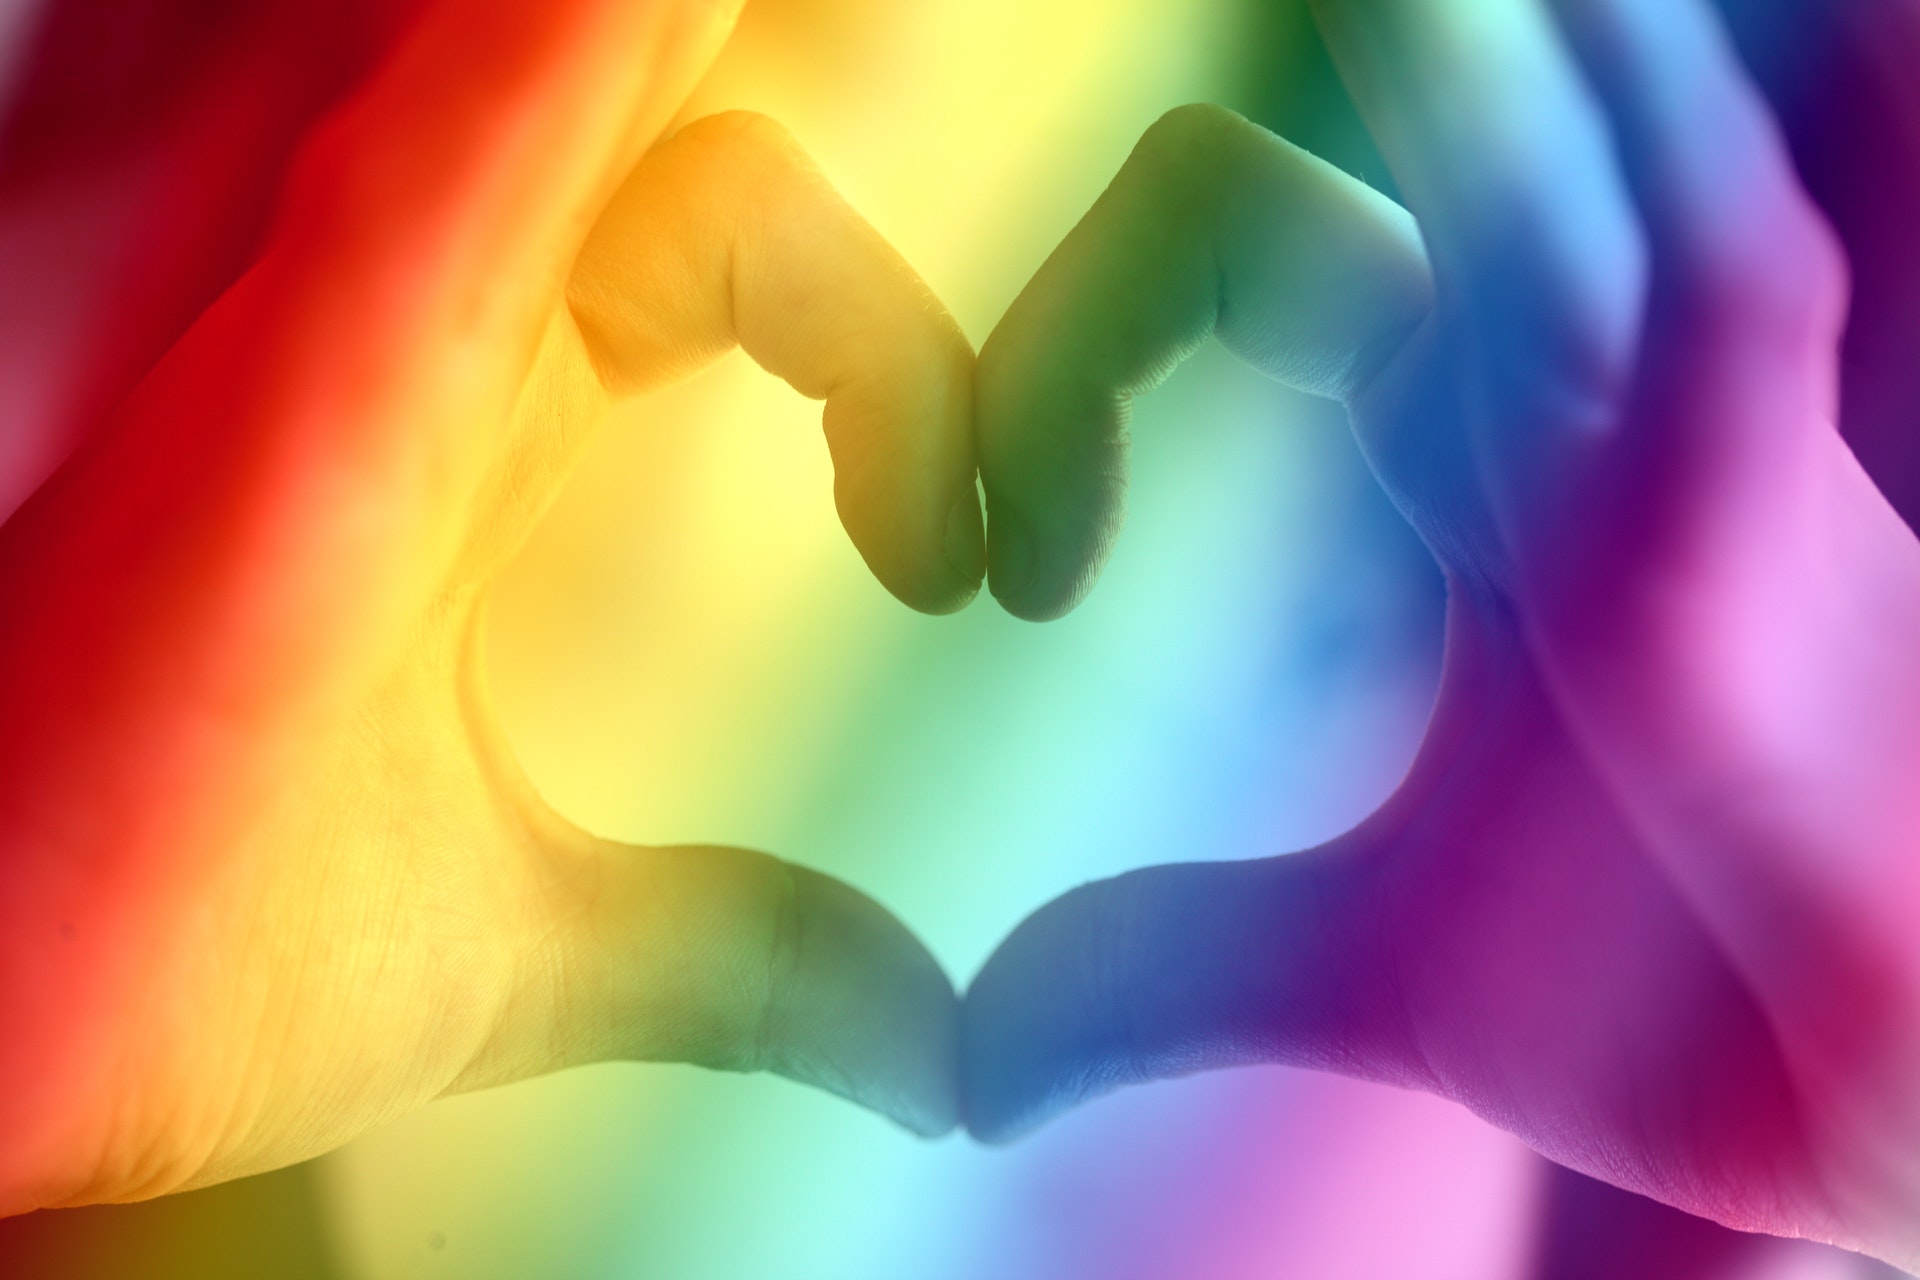 Affirming Queer Pagans: Radical Love and Compassion